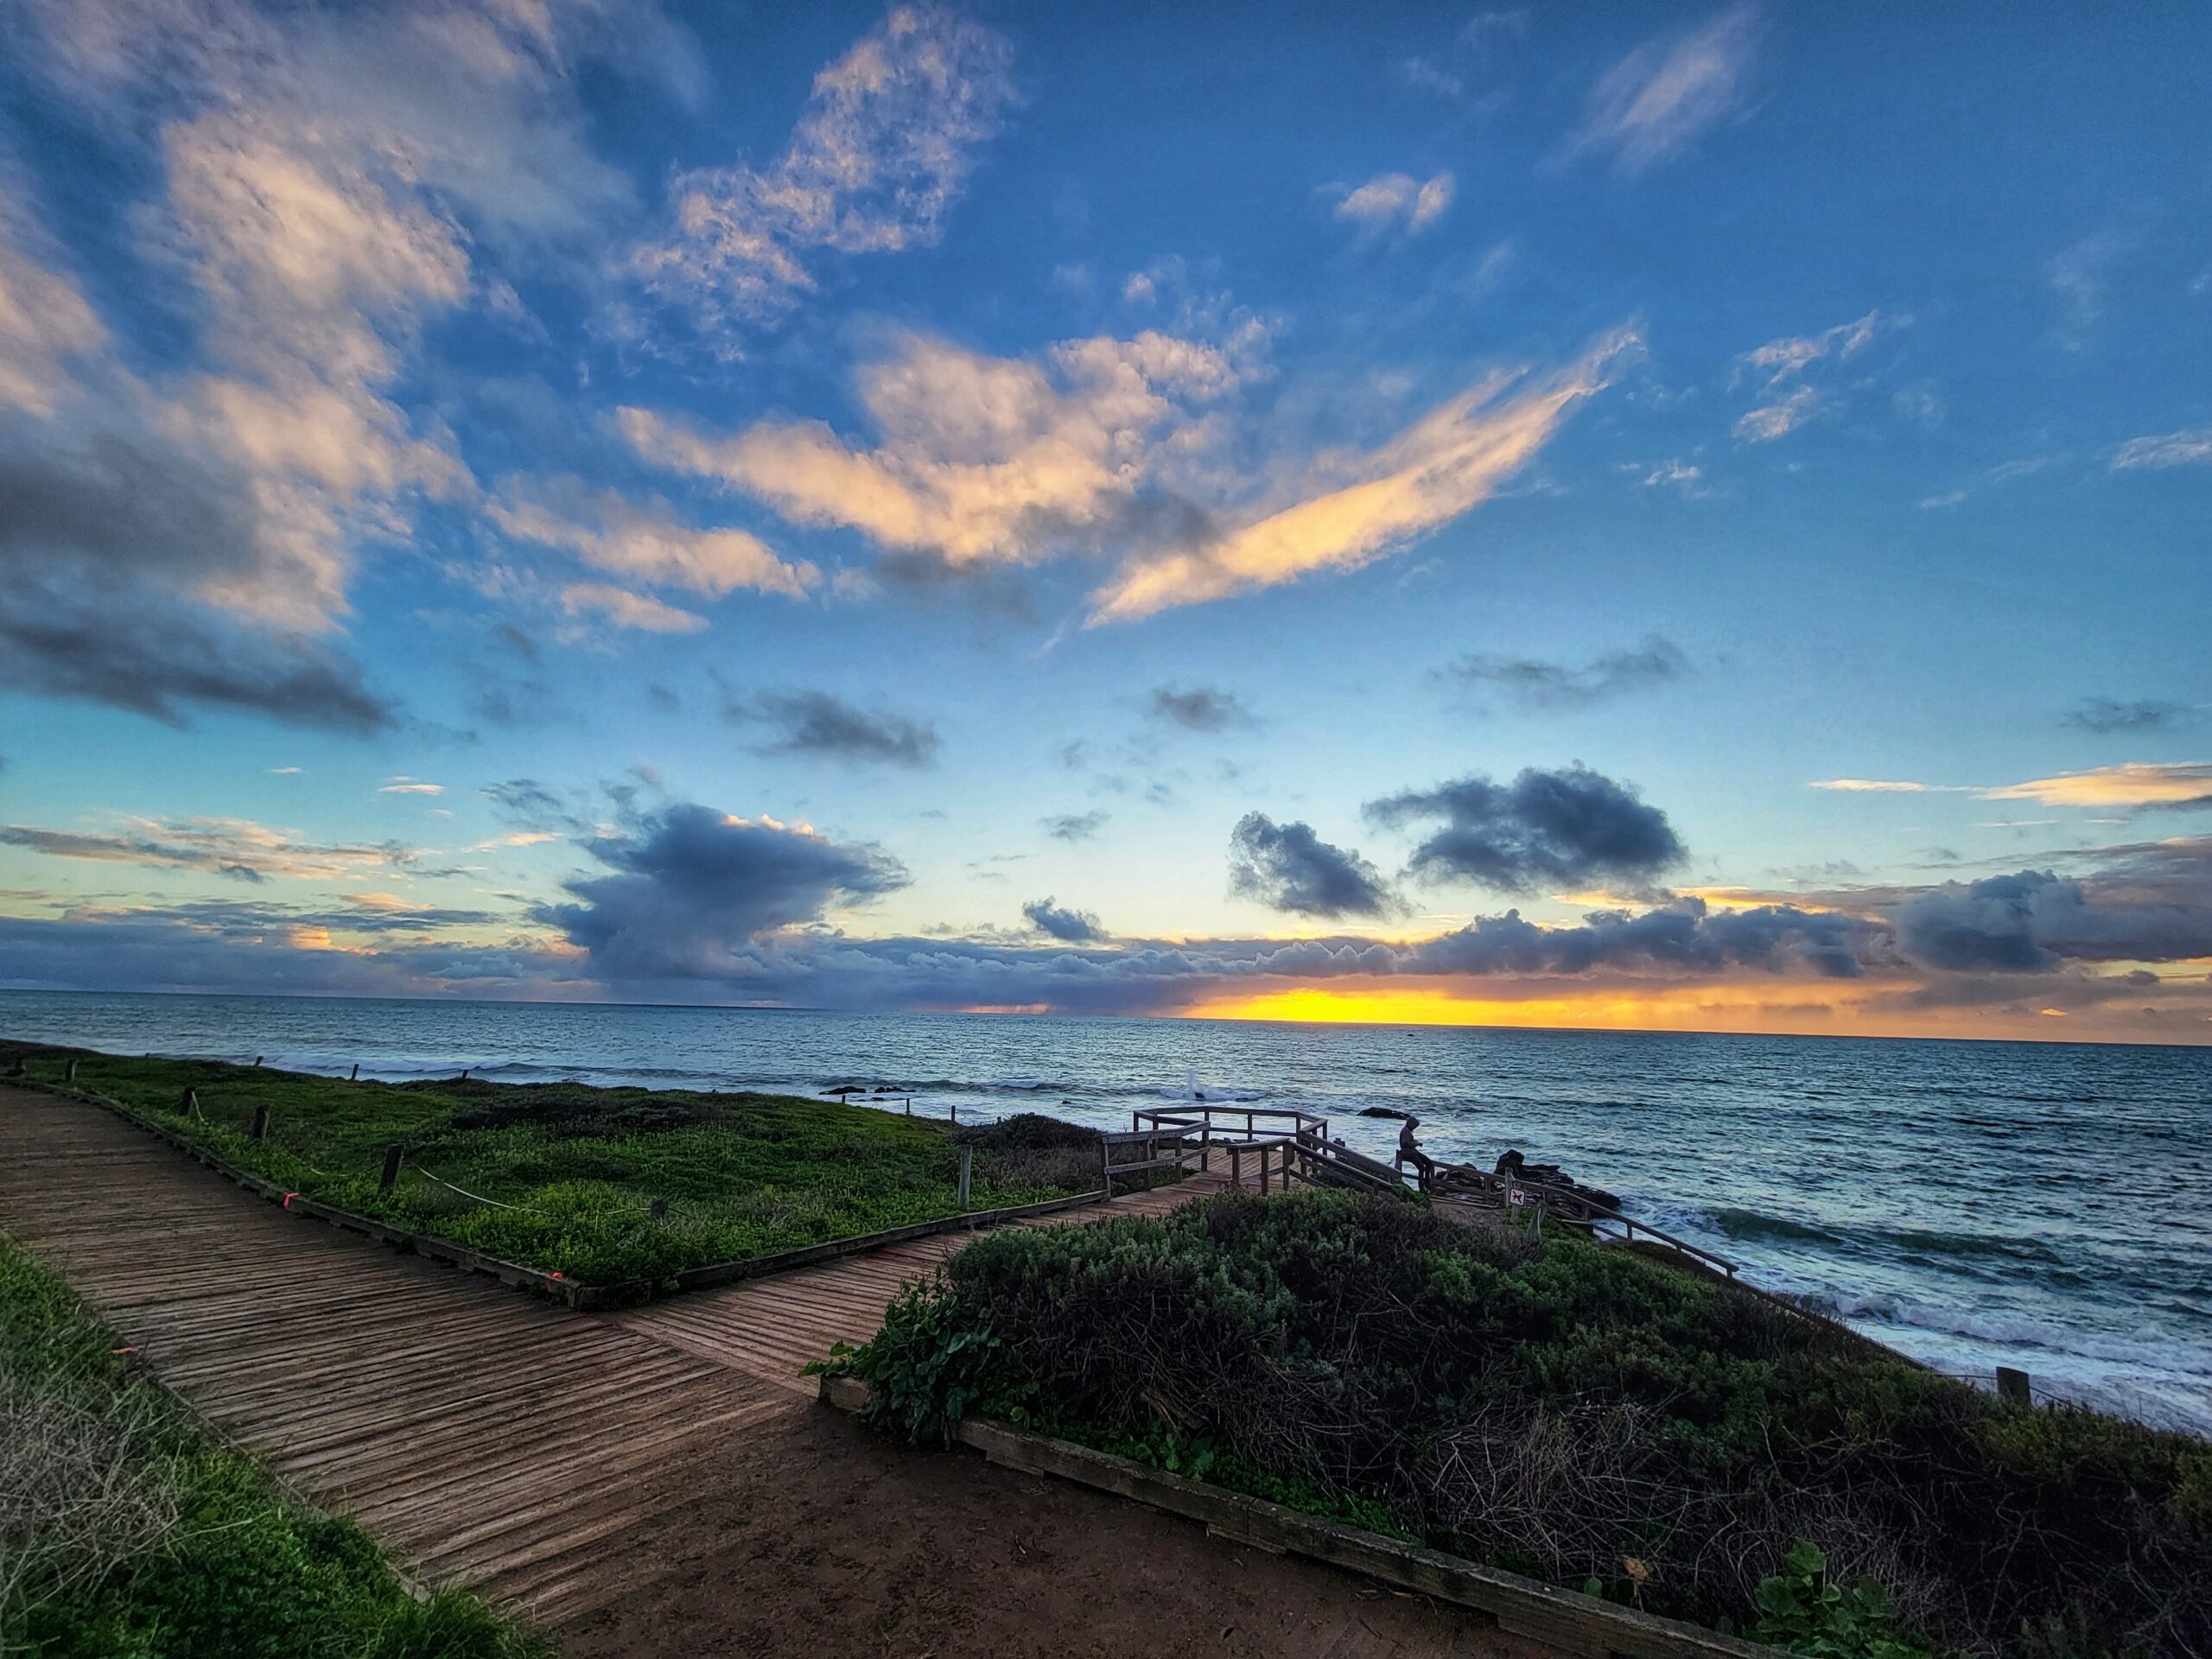 Sunset at Moonstone Beach Boardwalk in Cambria